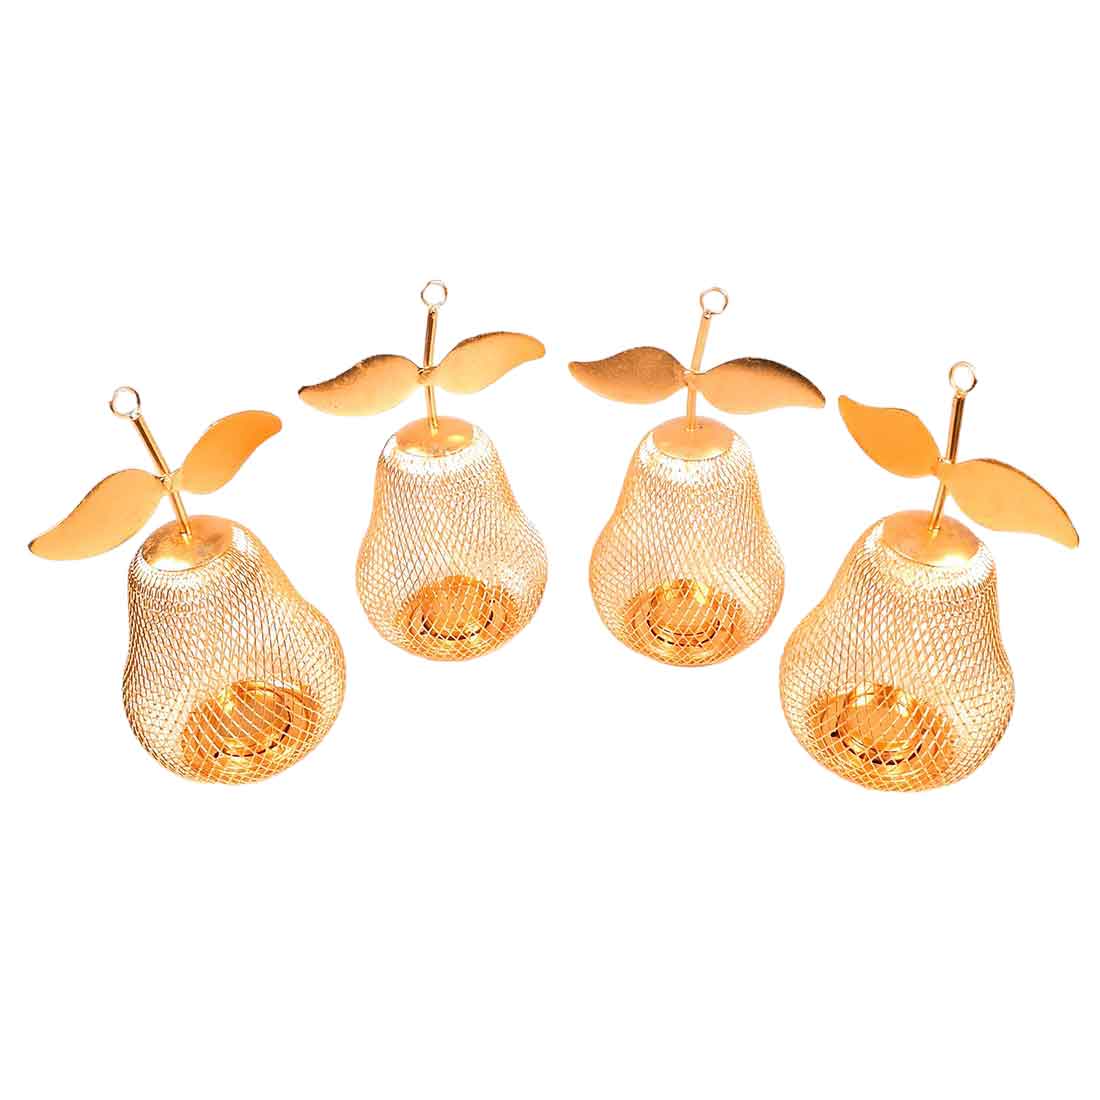 Tea Light Candle Holder | Pear Design Golden Candle Stand - For Table & Home Decor - 9 Inch - Apkamart #Style_Pack of 4